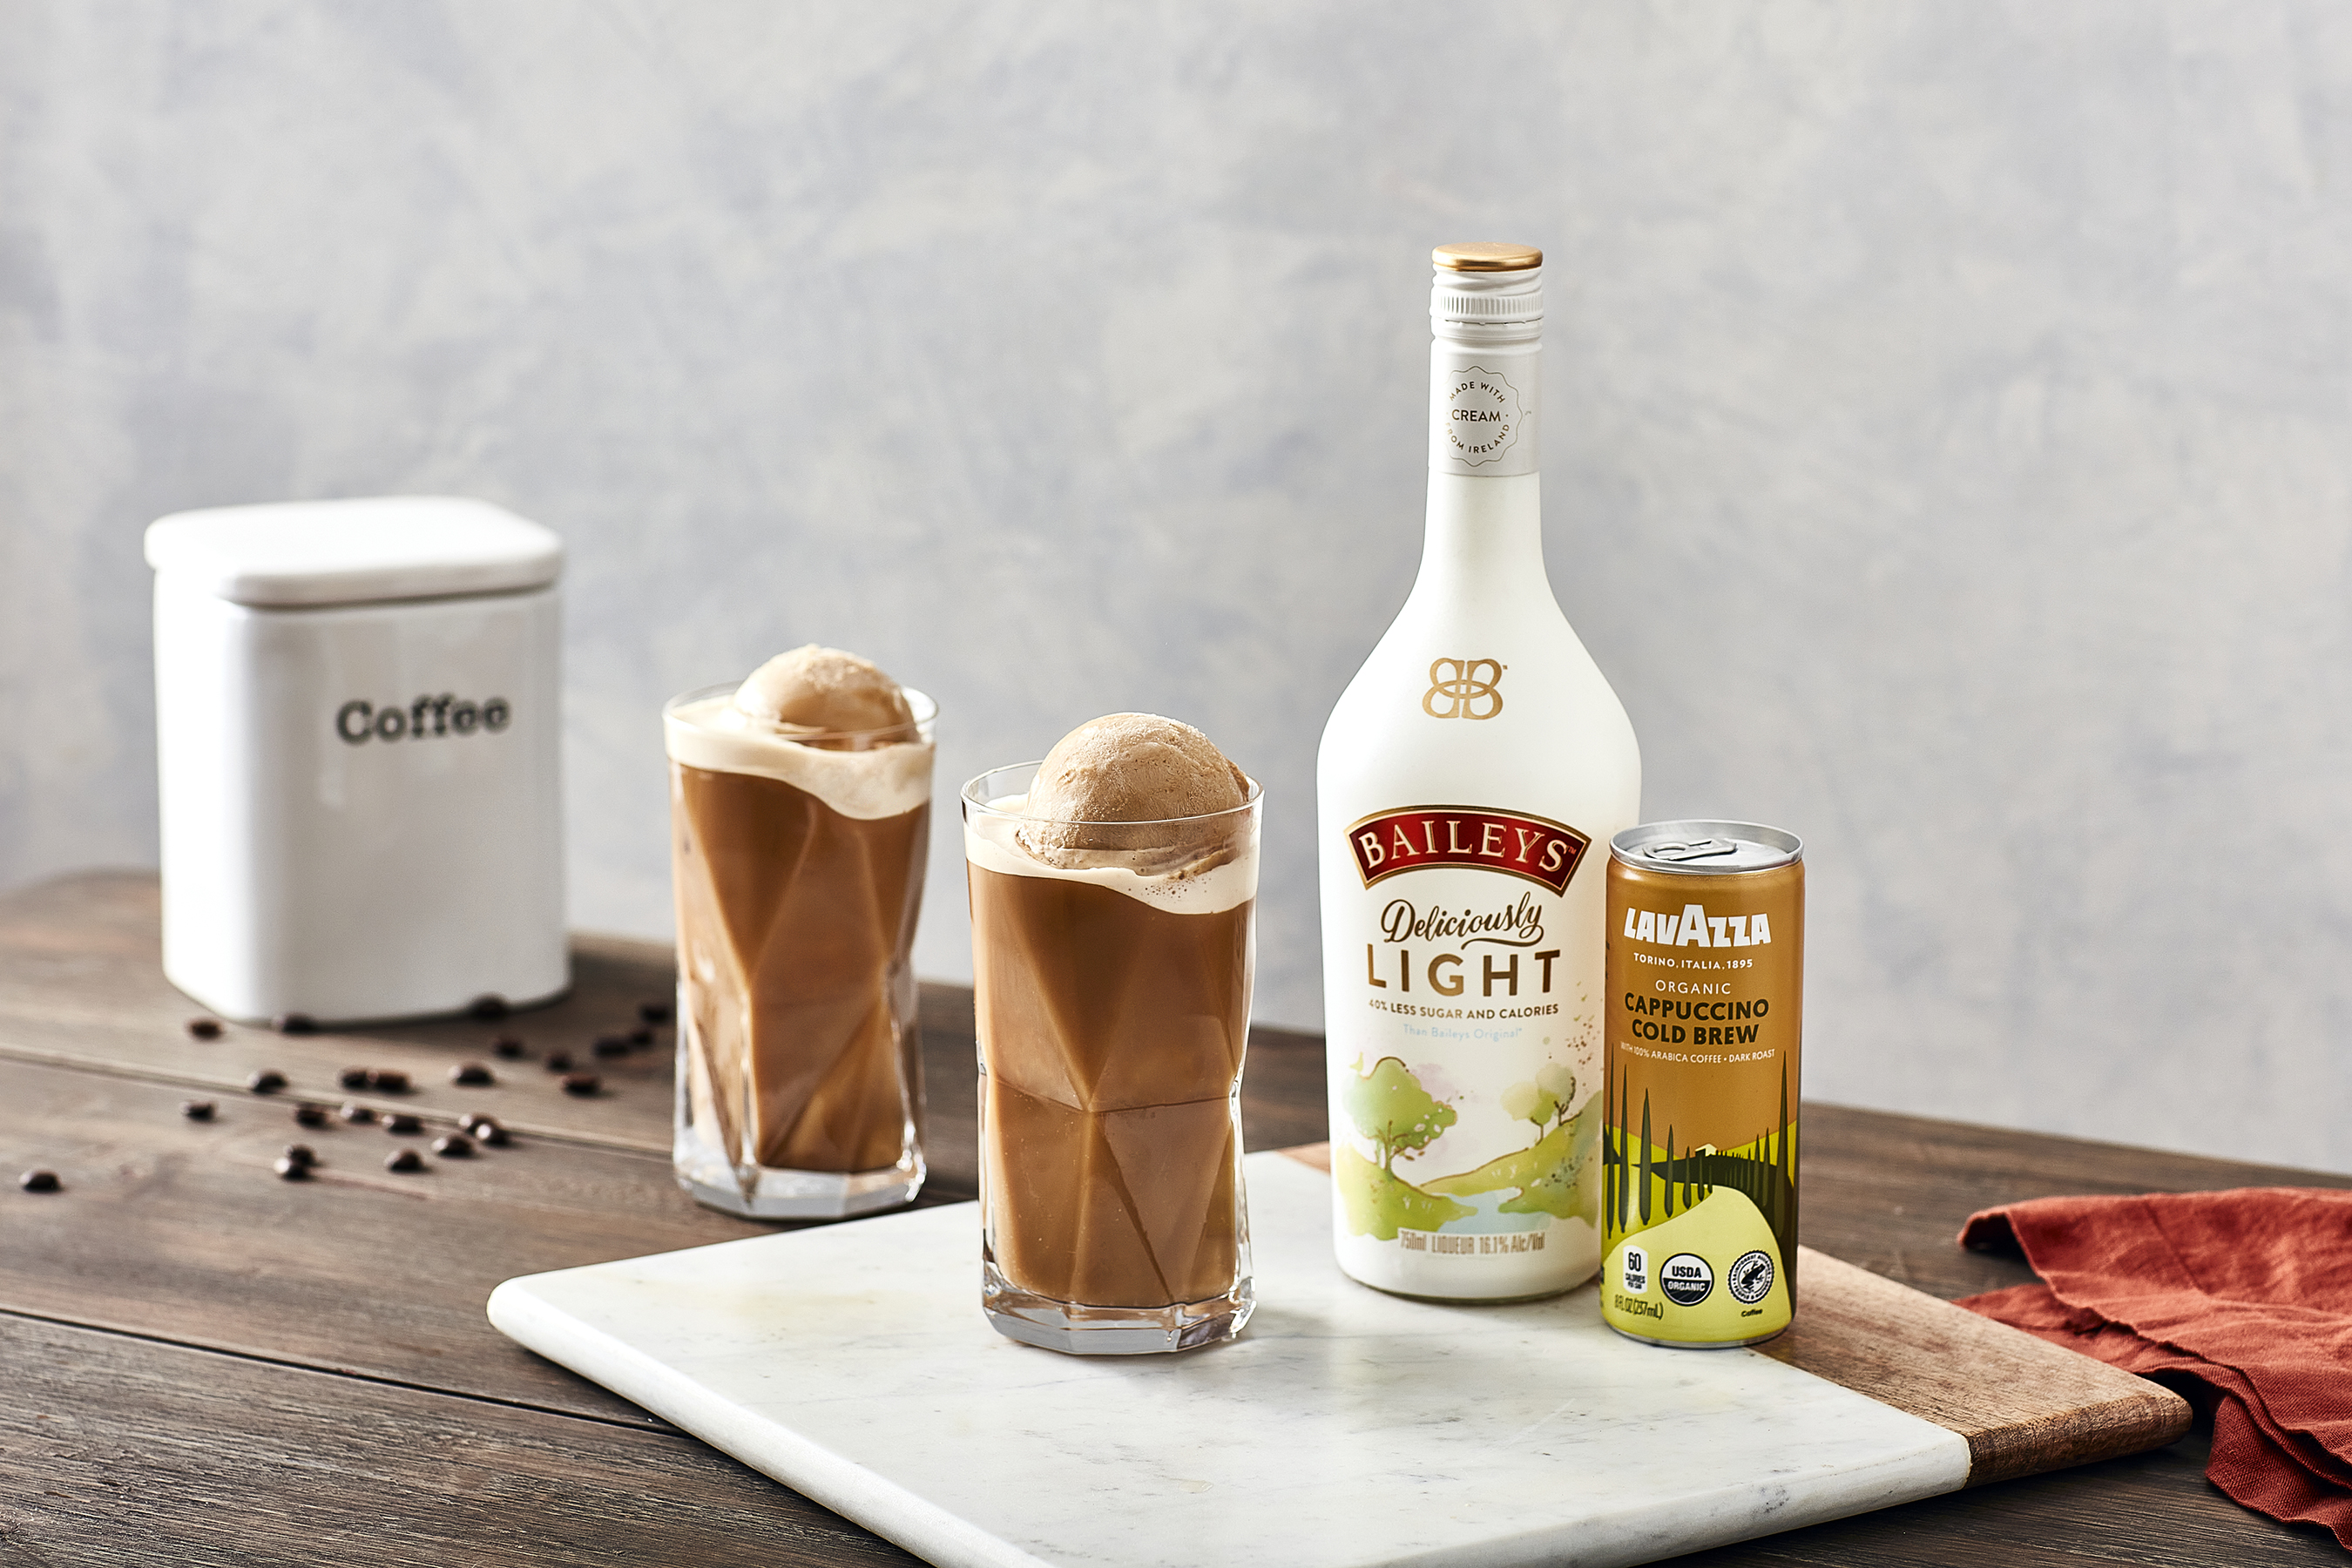 Cappuccino Cold Brew with Baileys Deliciously Light Ice Cubes